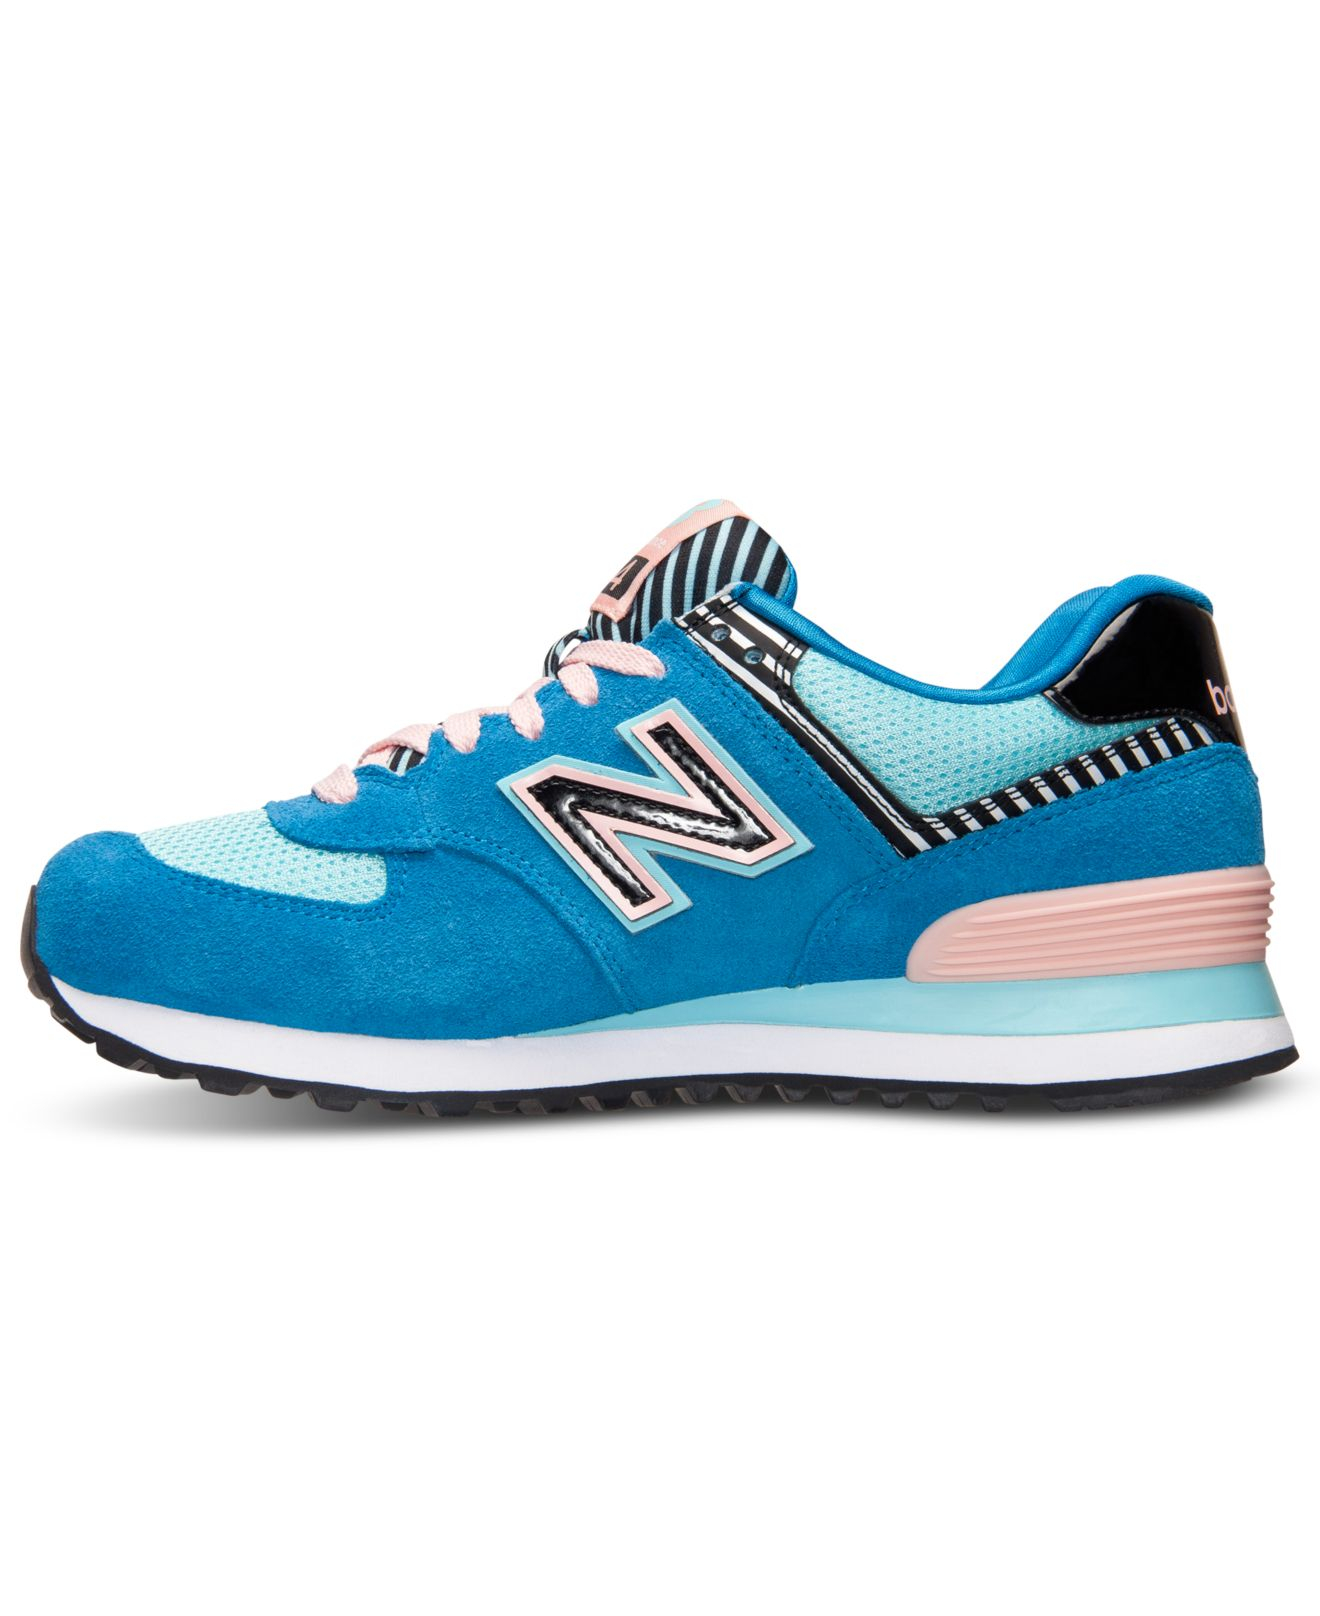 Lyst - New Balance Women's 574 Casual Sneakers From Finish Line in Blue